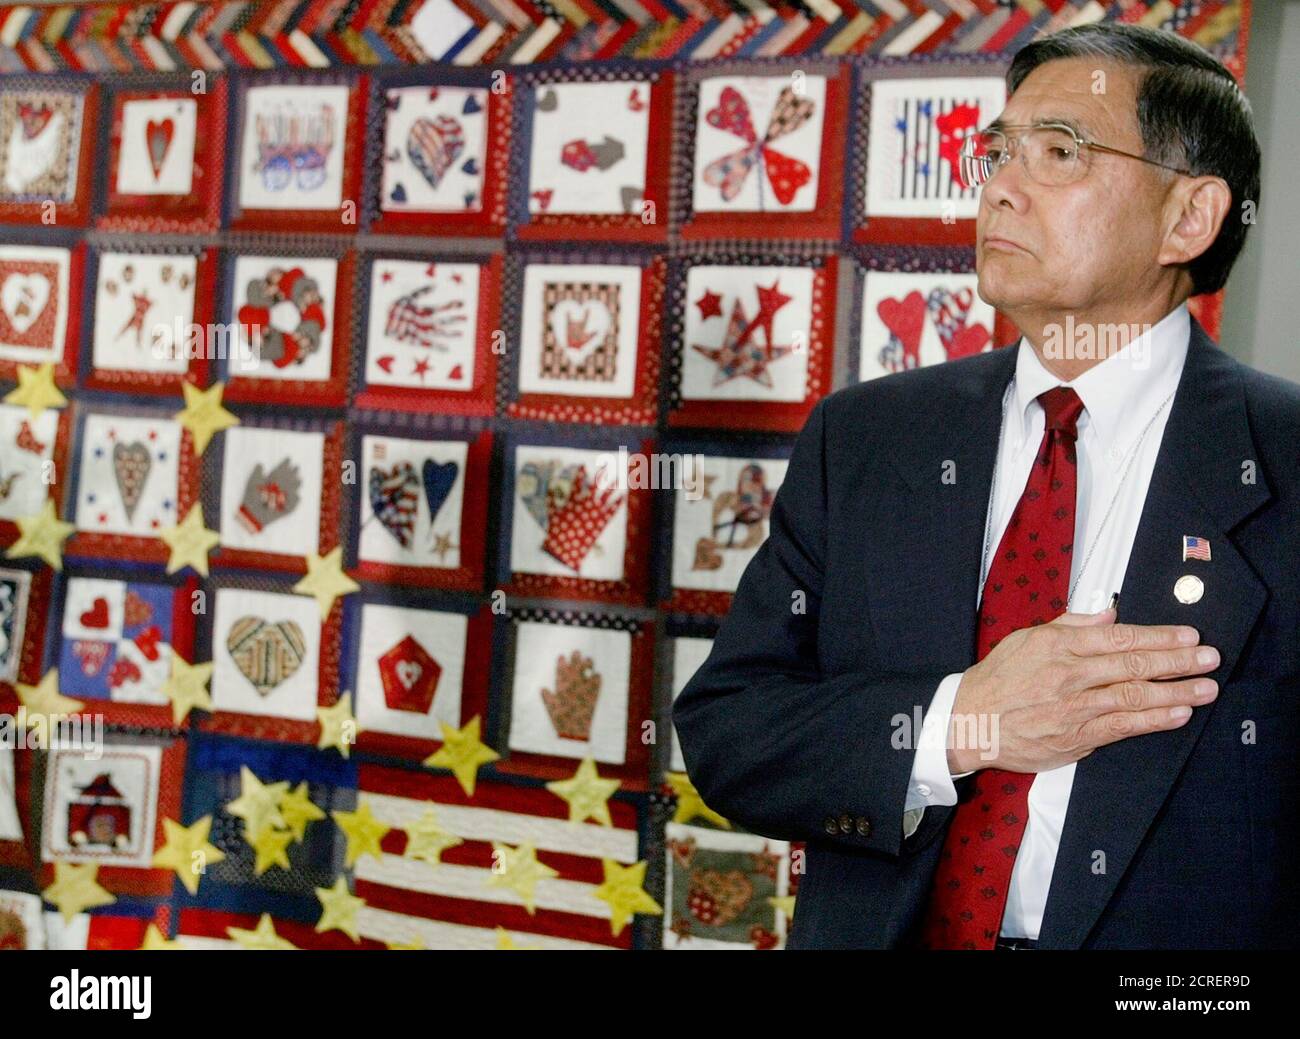 U.S. Secretary of Transportation Norman Mineta stands with his hand over his heart during a 'Hearts and Hands Across the Potomac' quilt dedication ceremony at the Department of Transportation in Washington, August 27, 2002. The quilt was built by department women in honor of those women who died at the Pentagon attack on September 11, 2001 and was presented to the Department of Defense during the ceremony. REUTERS/Larry Downing  LSD Stock Photo